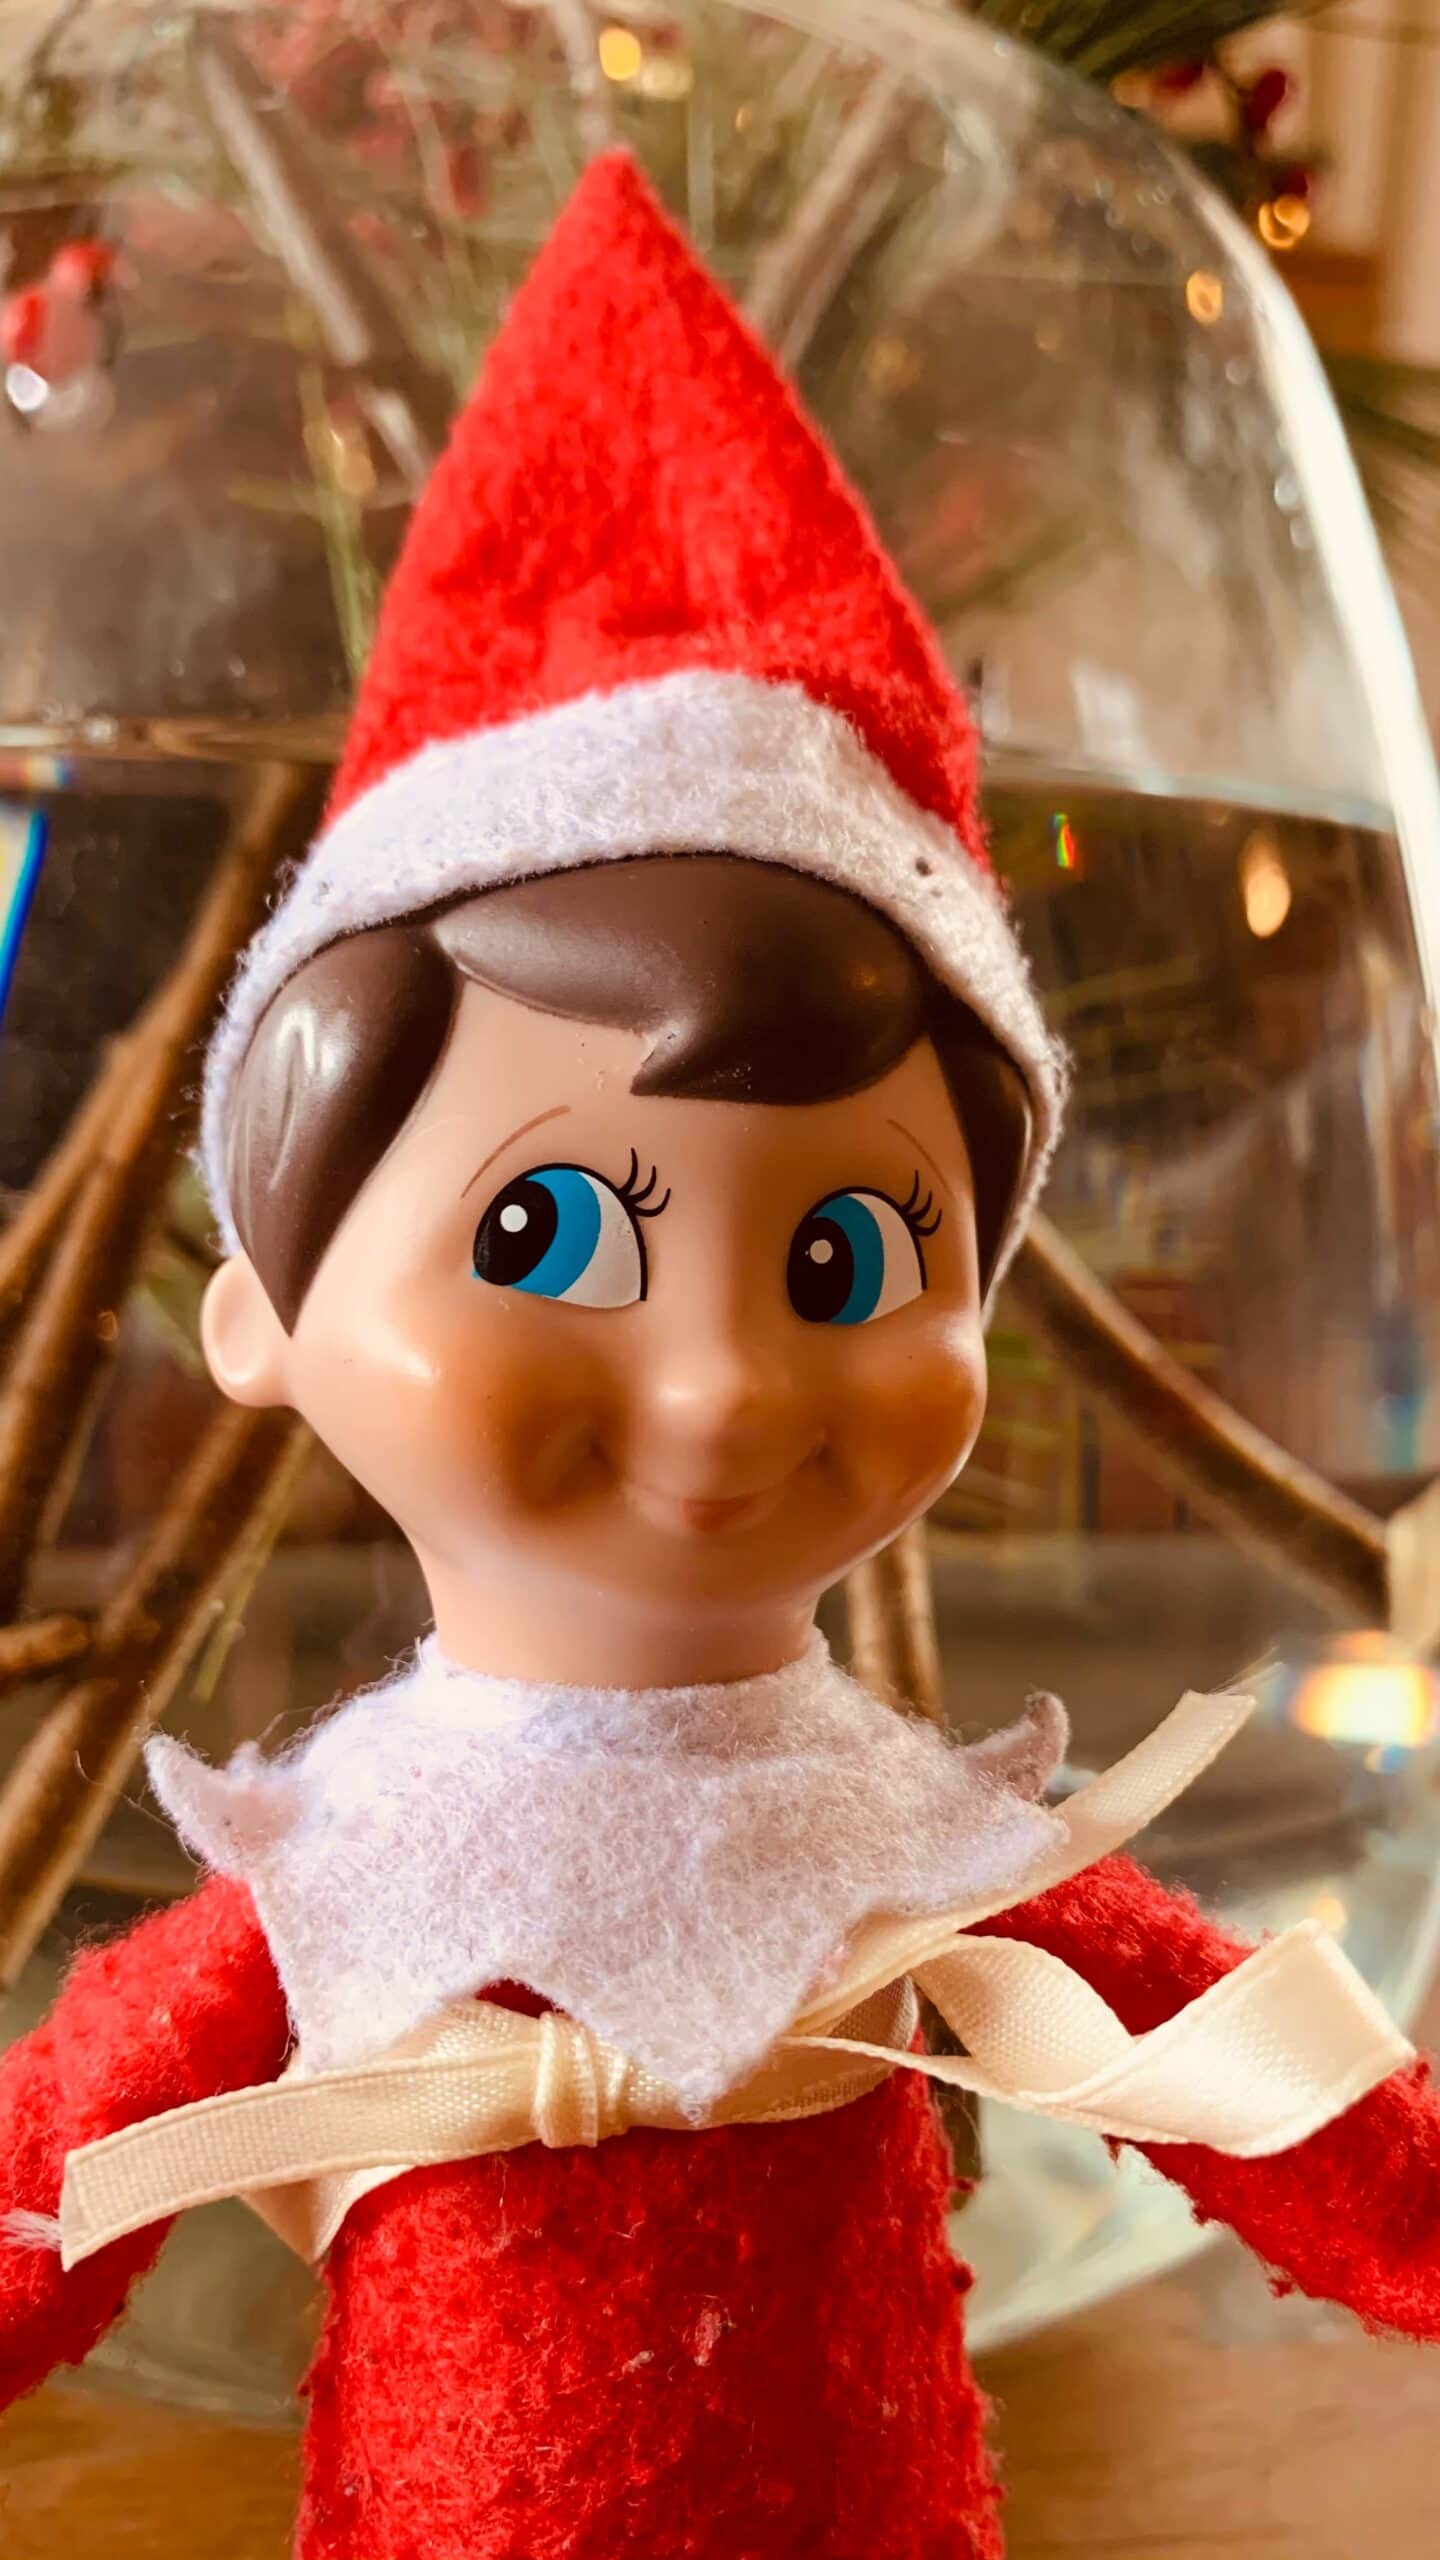 Genius Elf on the Shelf ideas for Christmas 2020 the kids will love -  Liverpool Echo